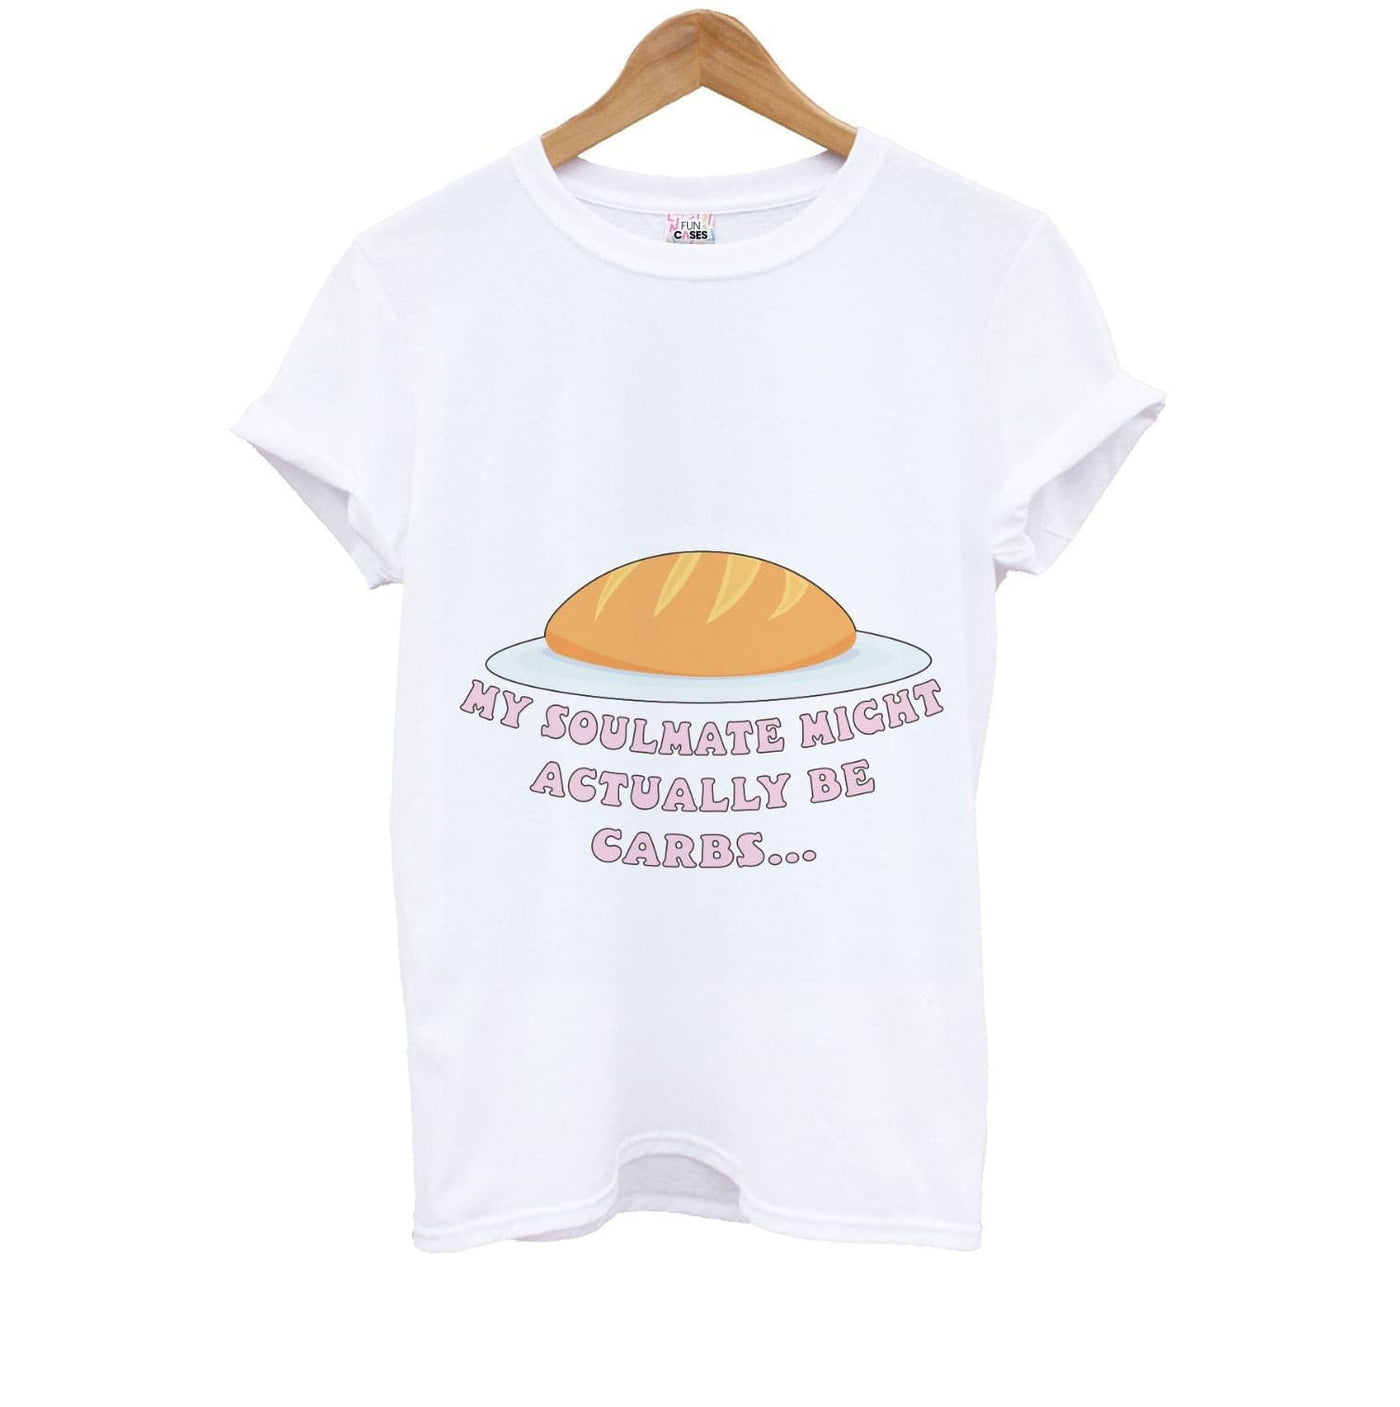 My Soulmate Might Actually Be Carbs - Mamma Mia Kids T-Shirt